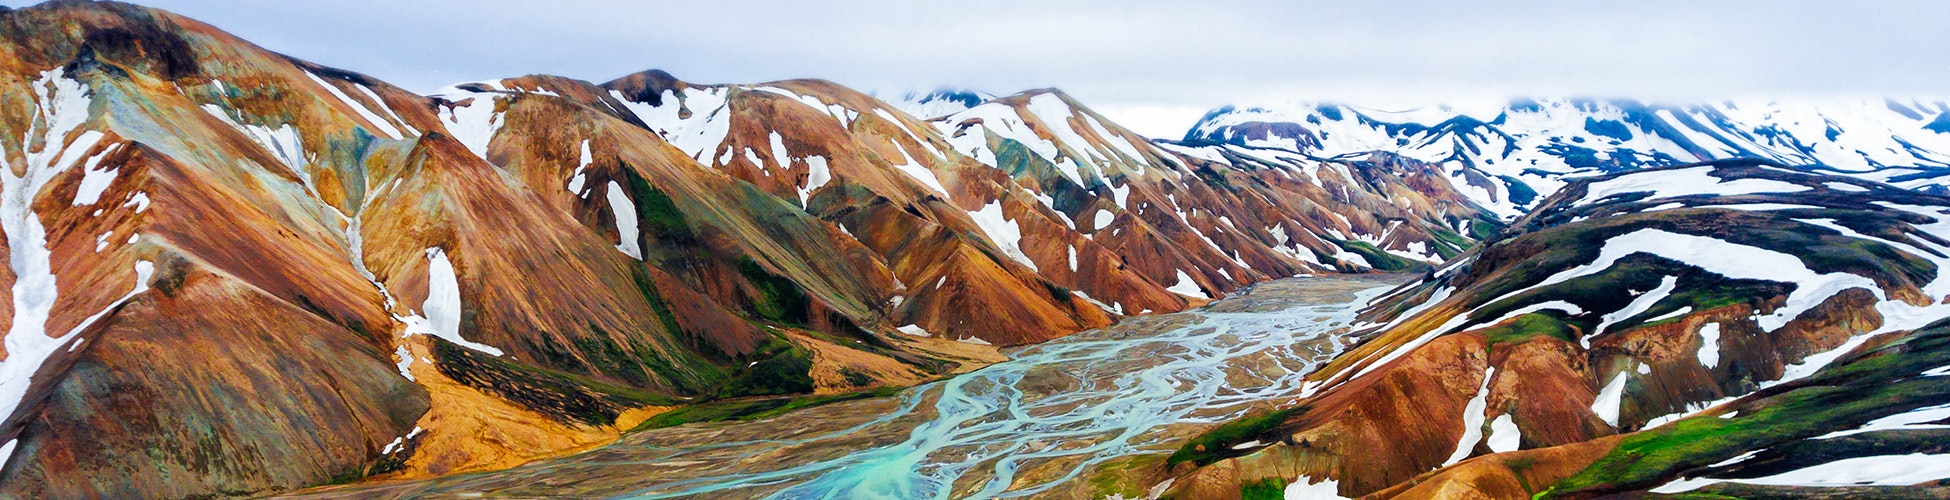 Colorful highlands of Iceland with snow-capped mountains